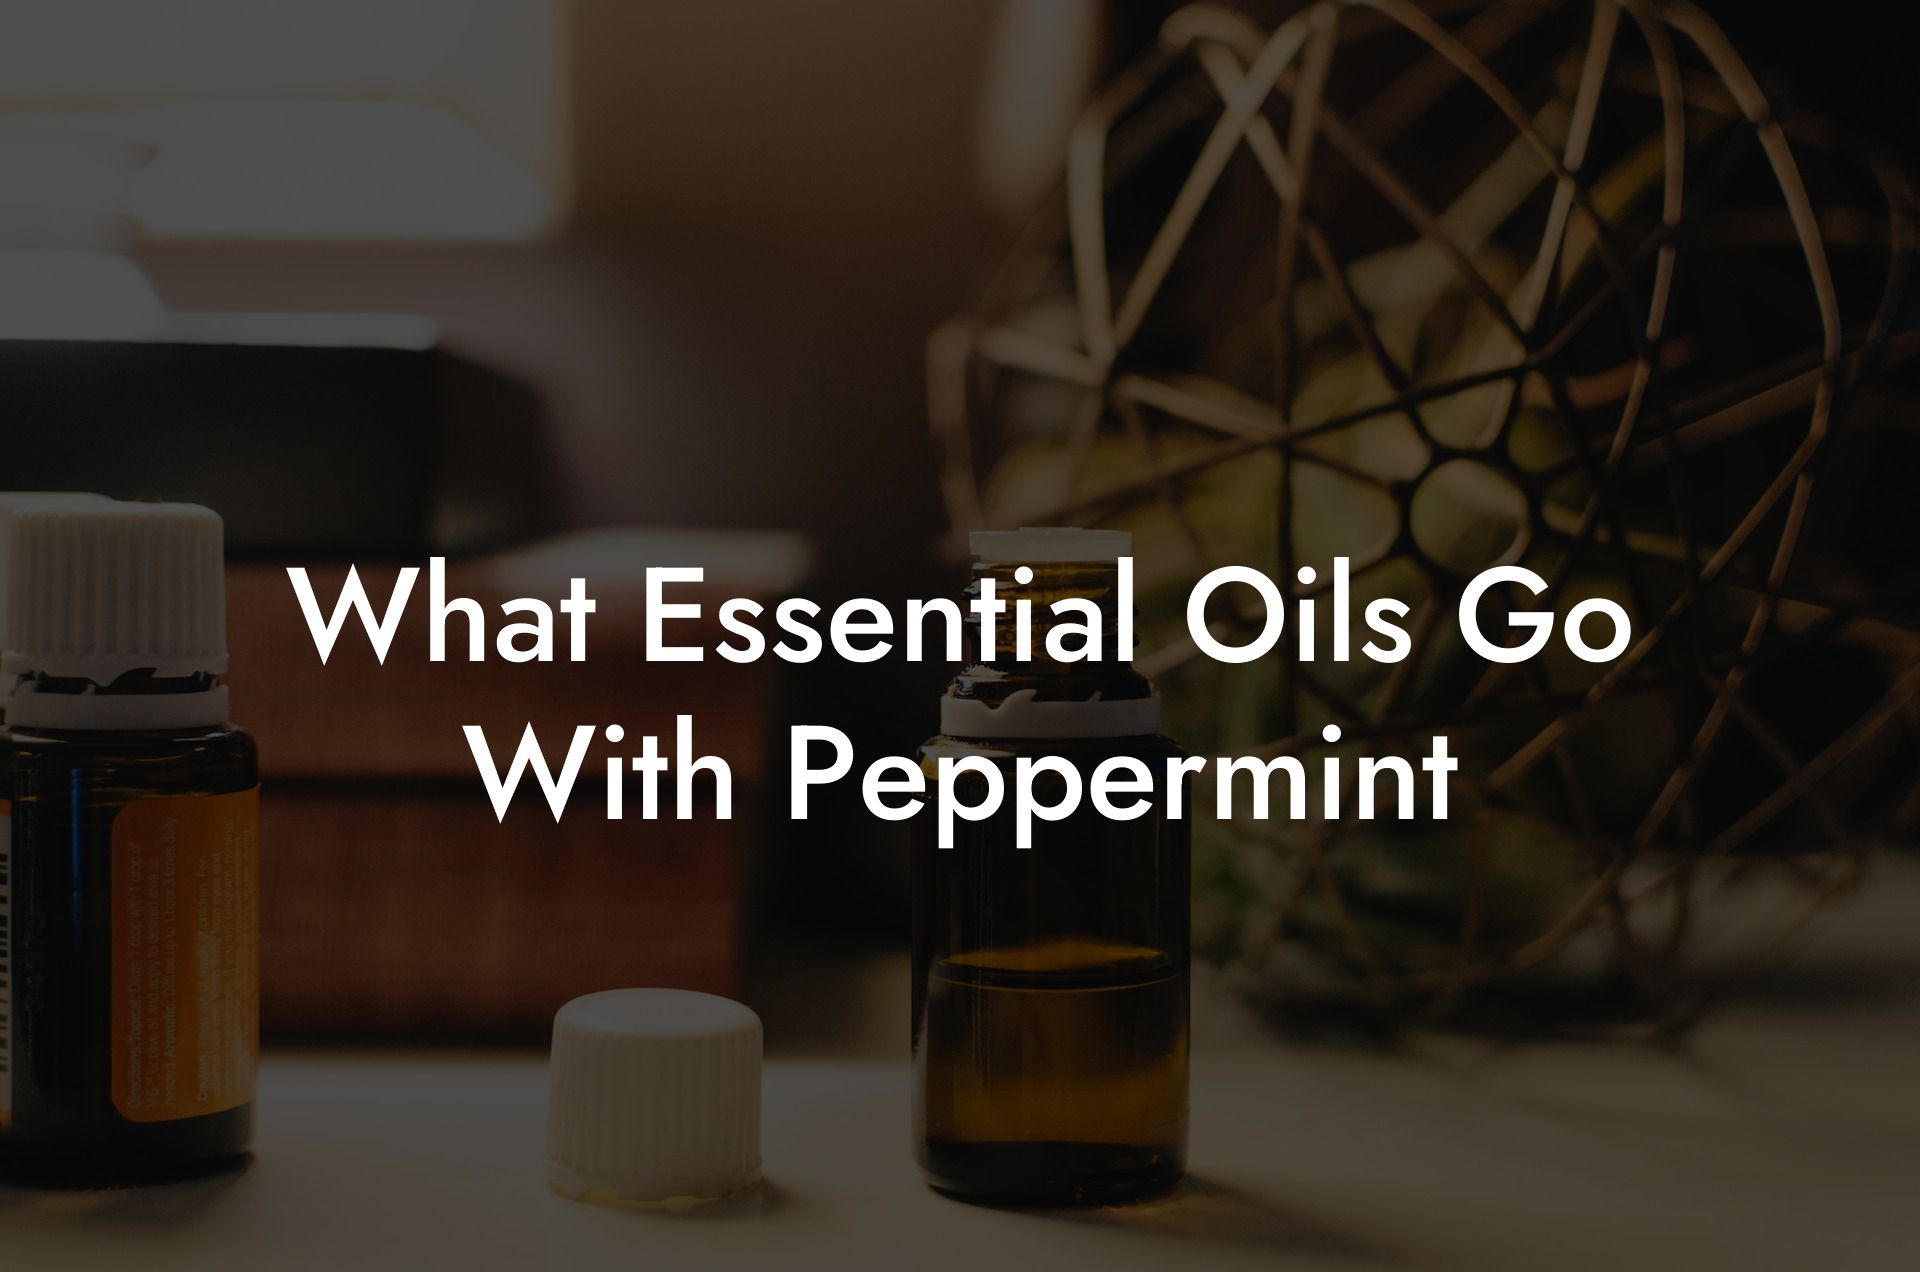 What Essential Oils Go With Peppermint